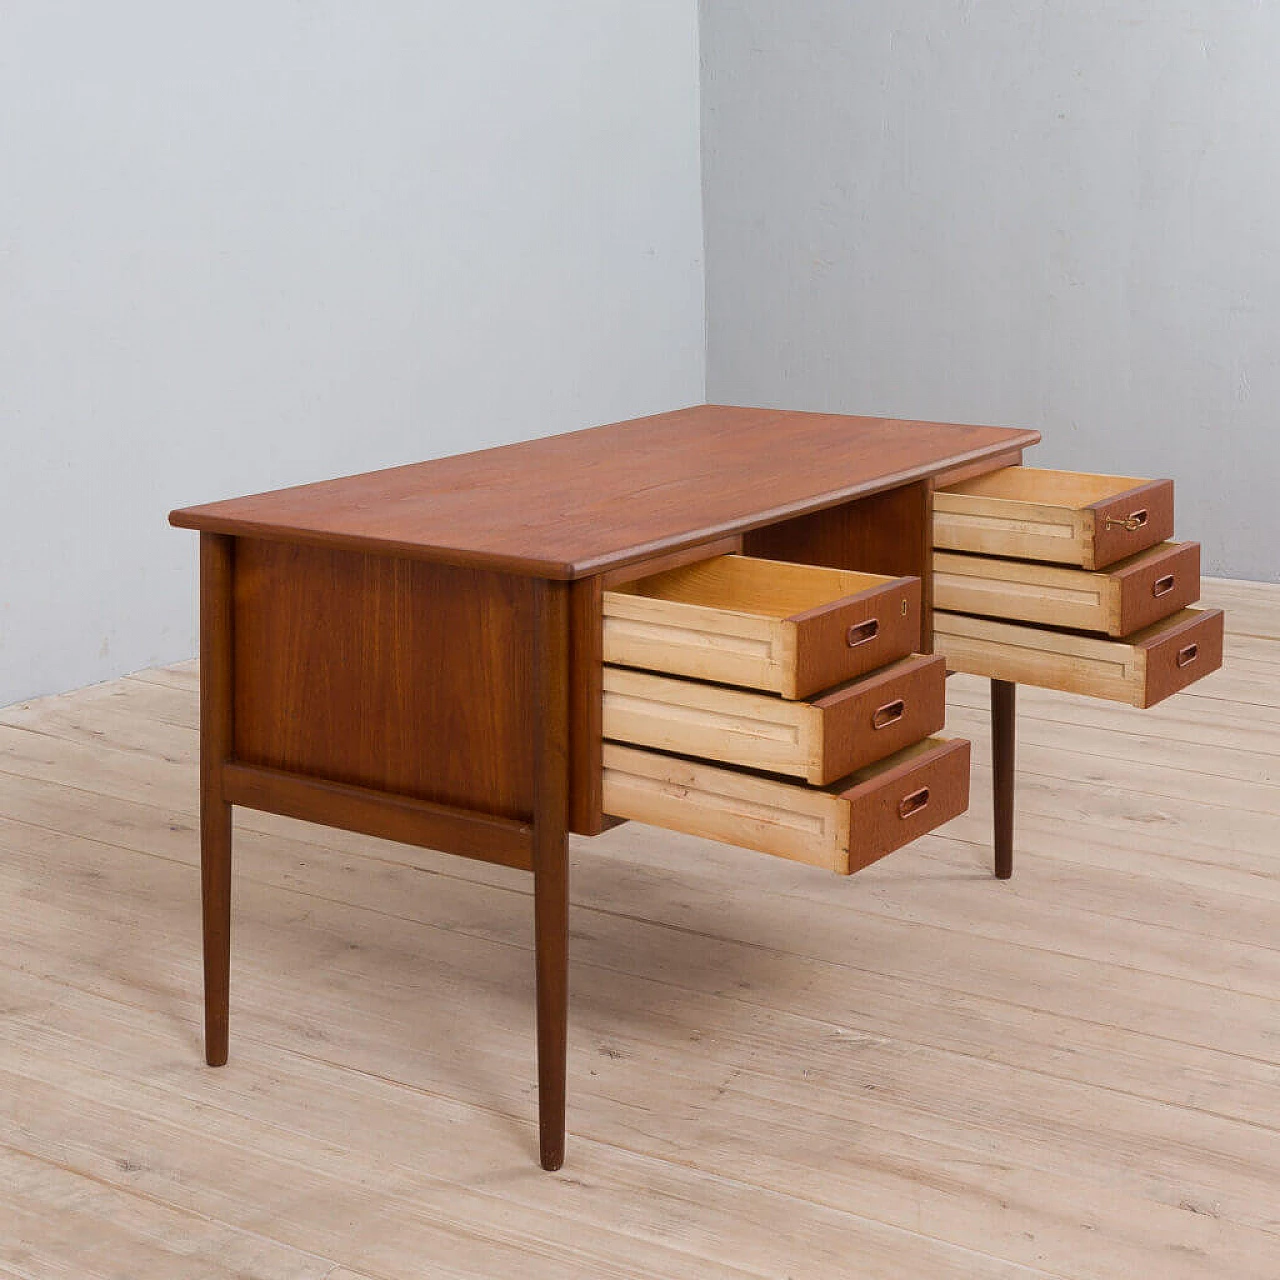 Teak desk with 6 drawers, 1960s 1472580